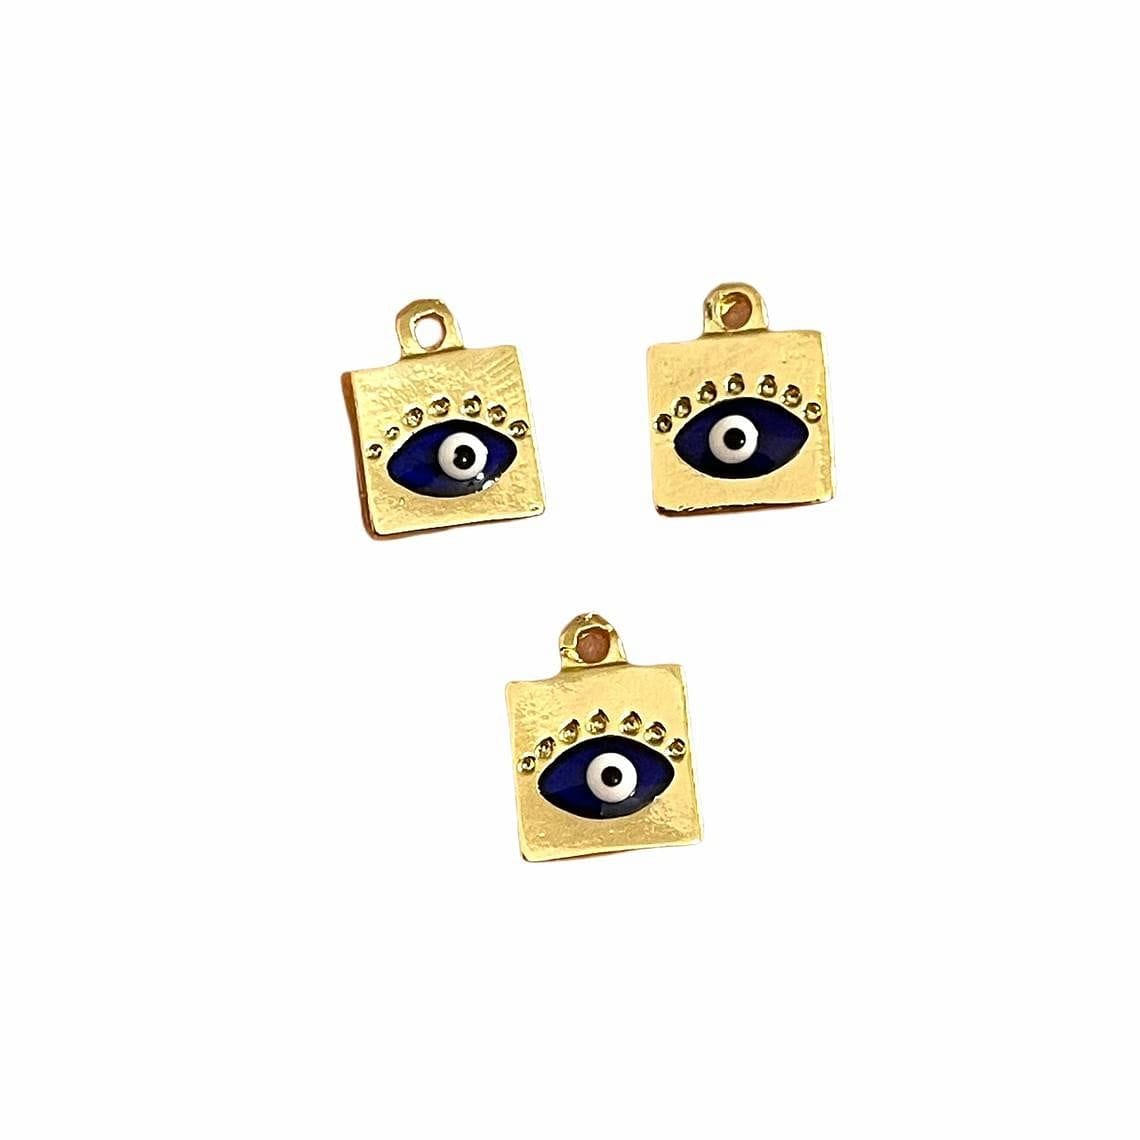 Gold Plated Square Evil Eye Eye Hanging Apparatus - Navy Blue